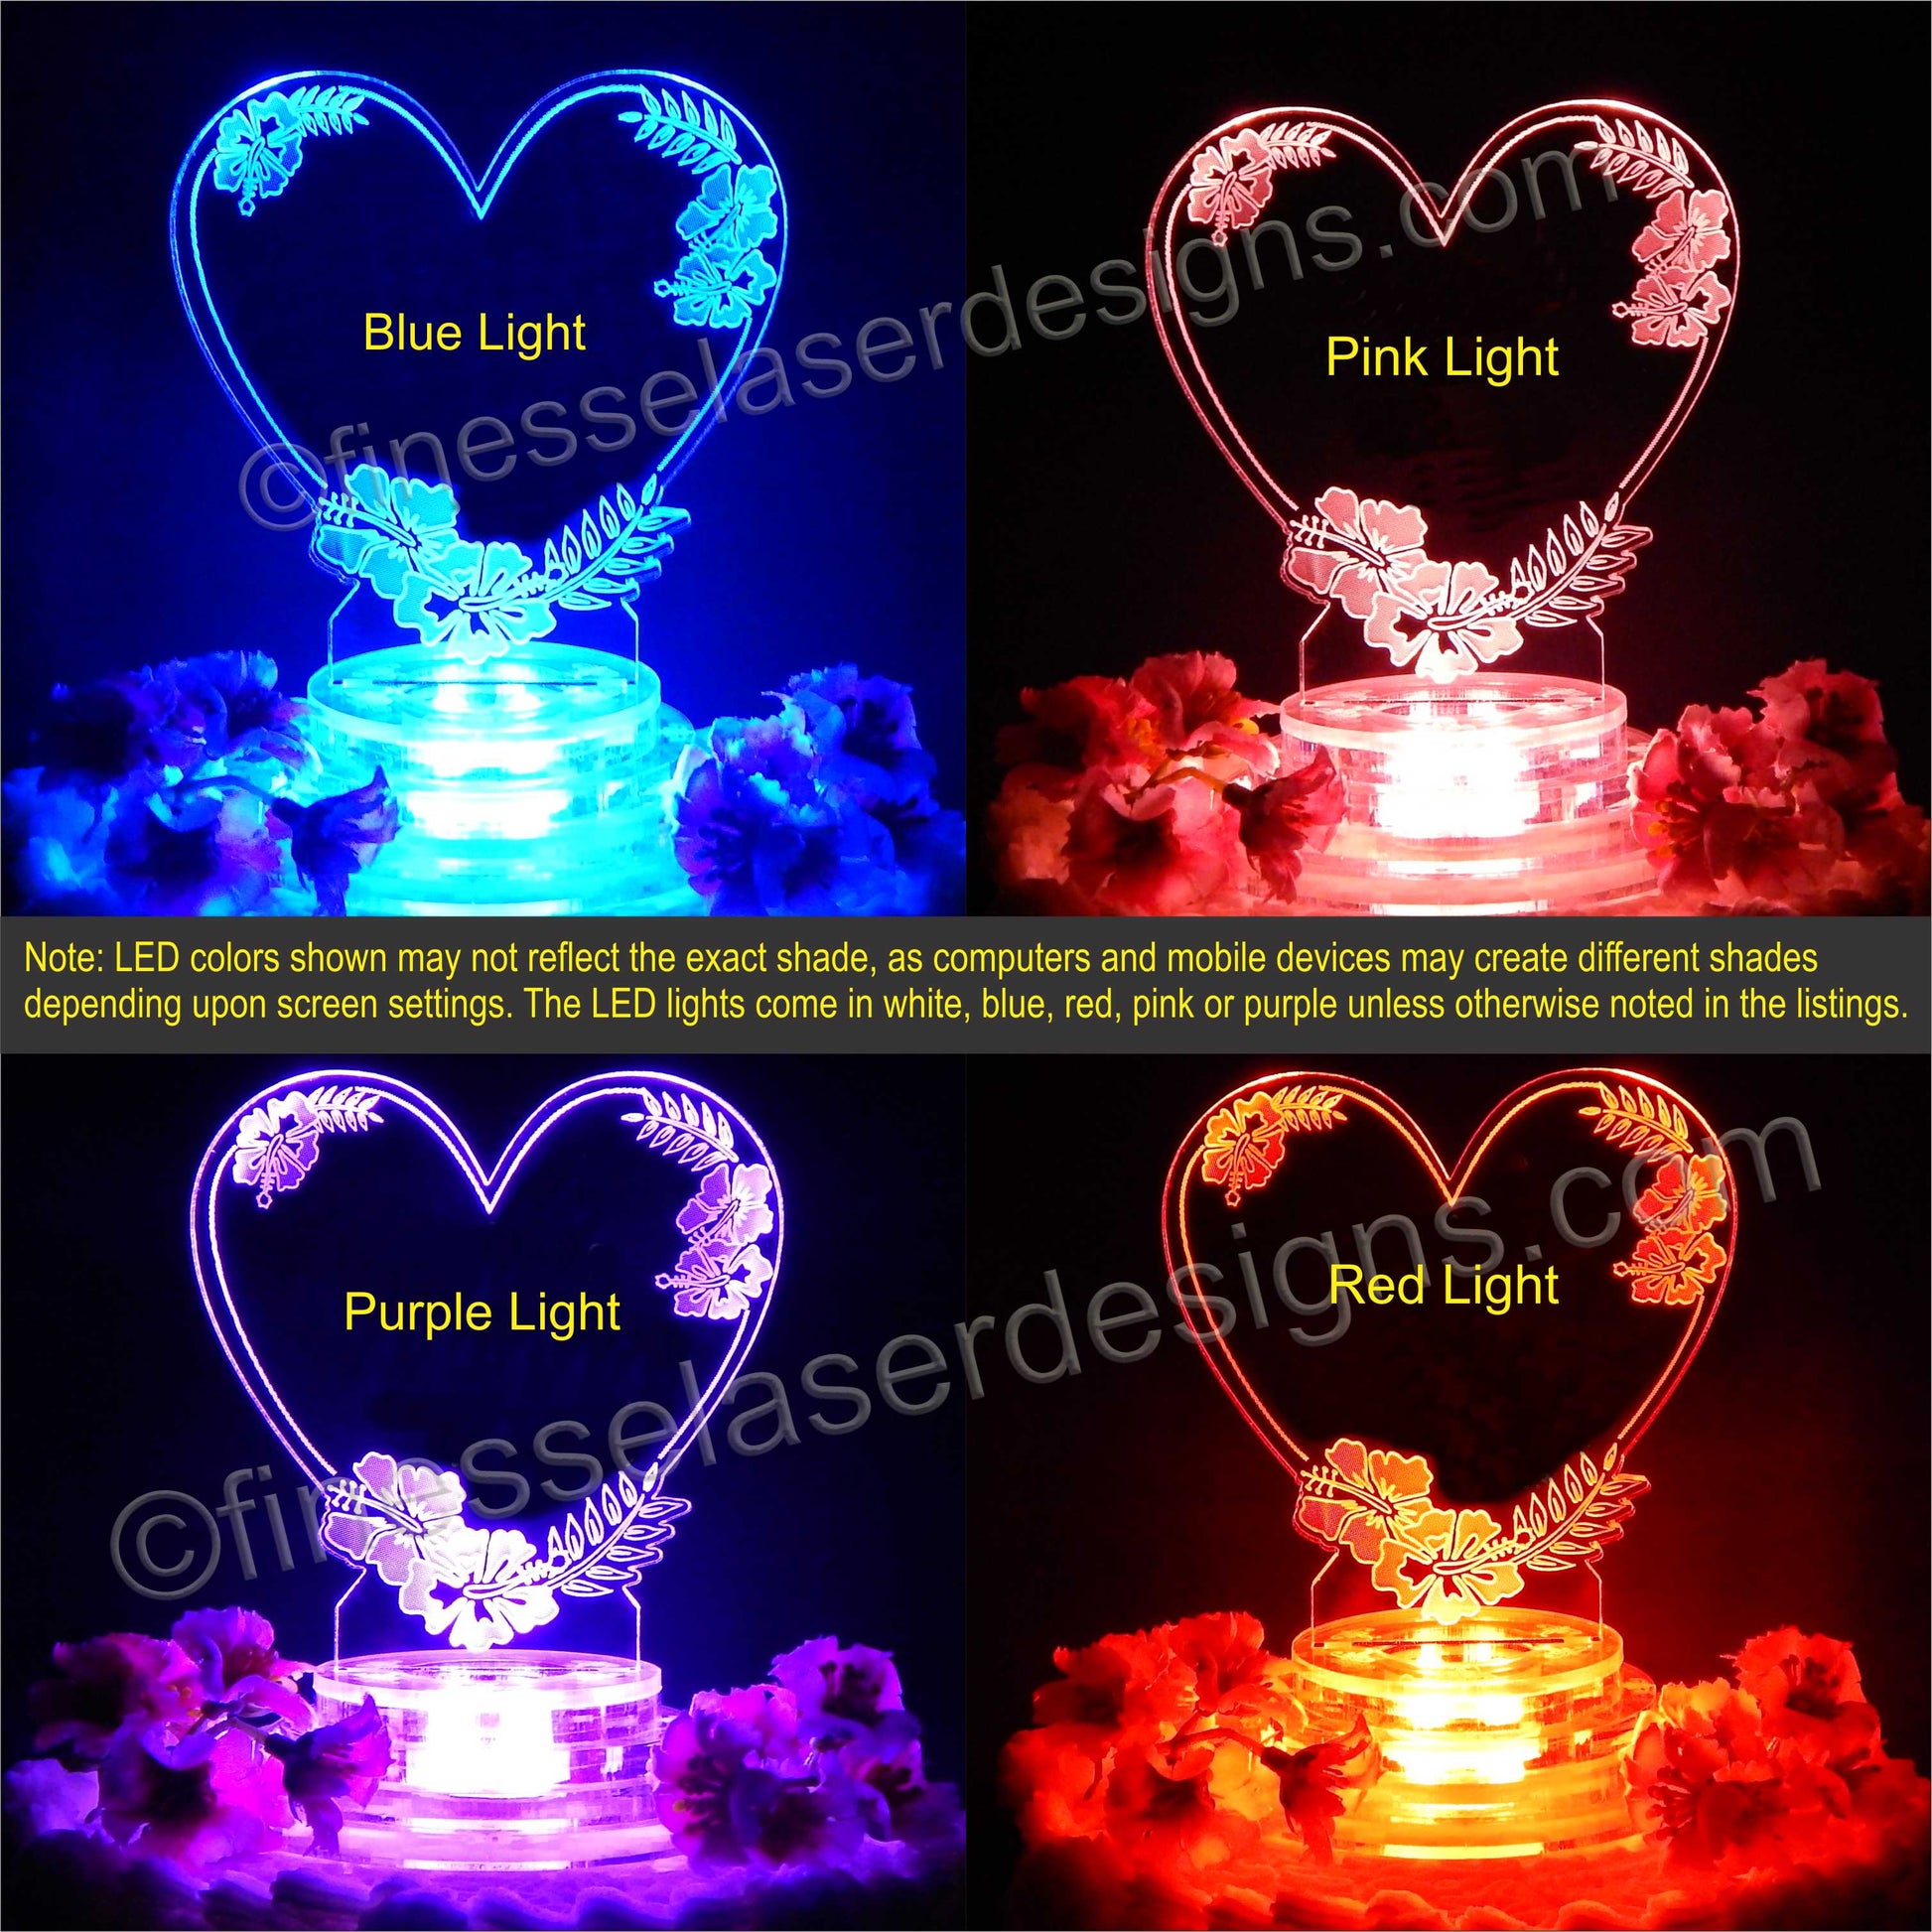 acrylic heart shaped cake topper designed with hibiscus flowers shown lighted in 4 colors; blue, pink, purple and red lights